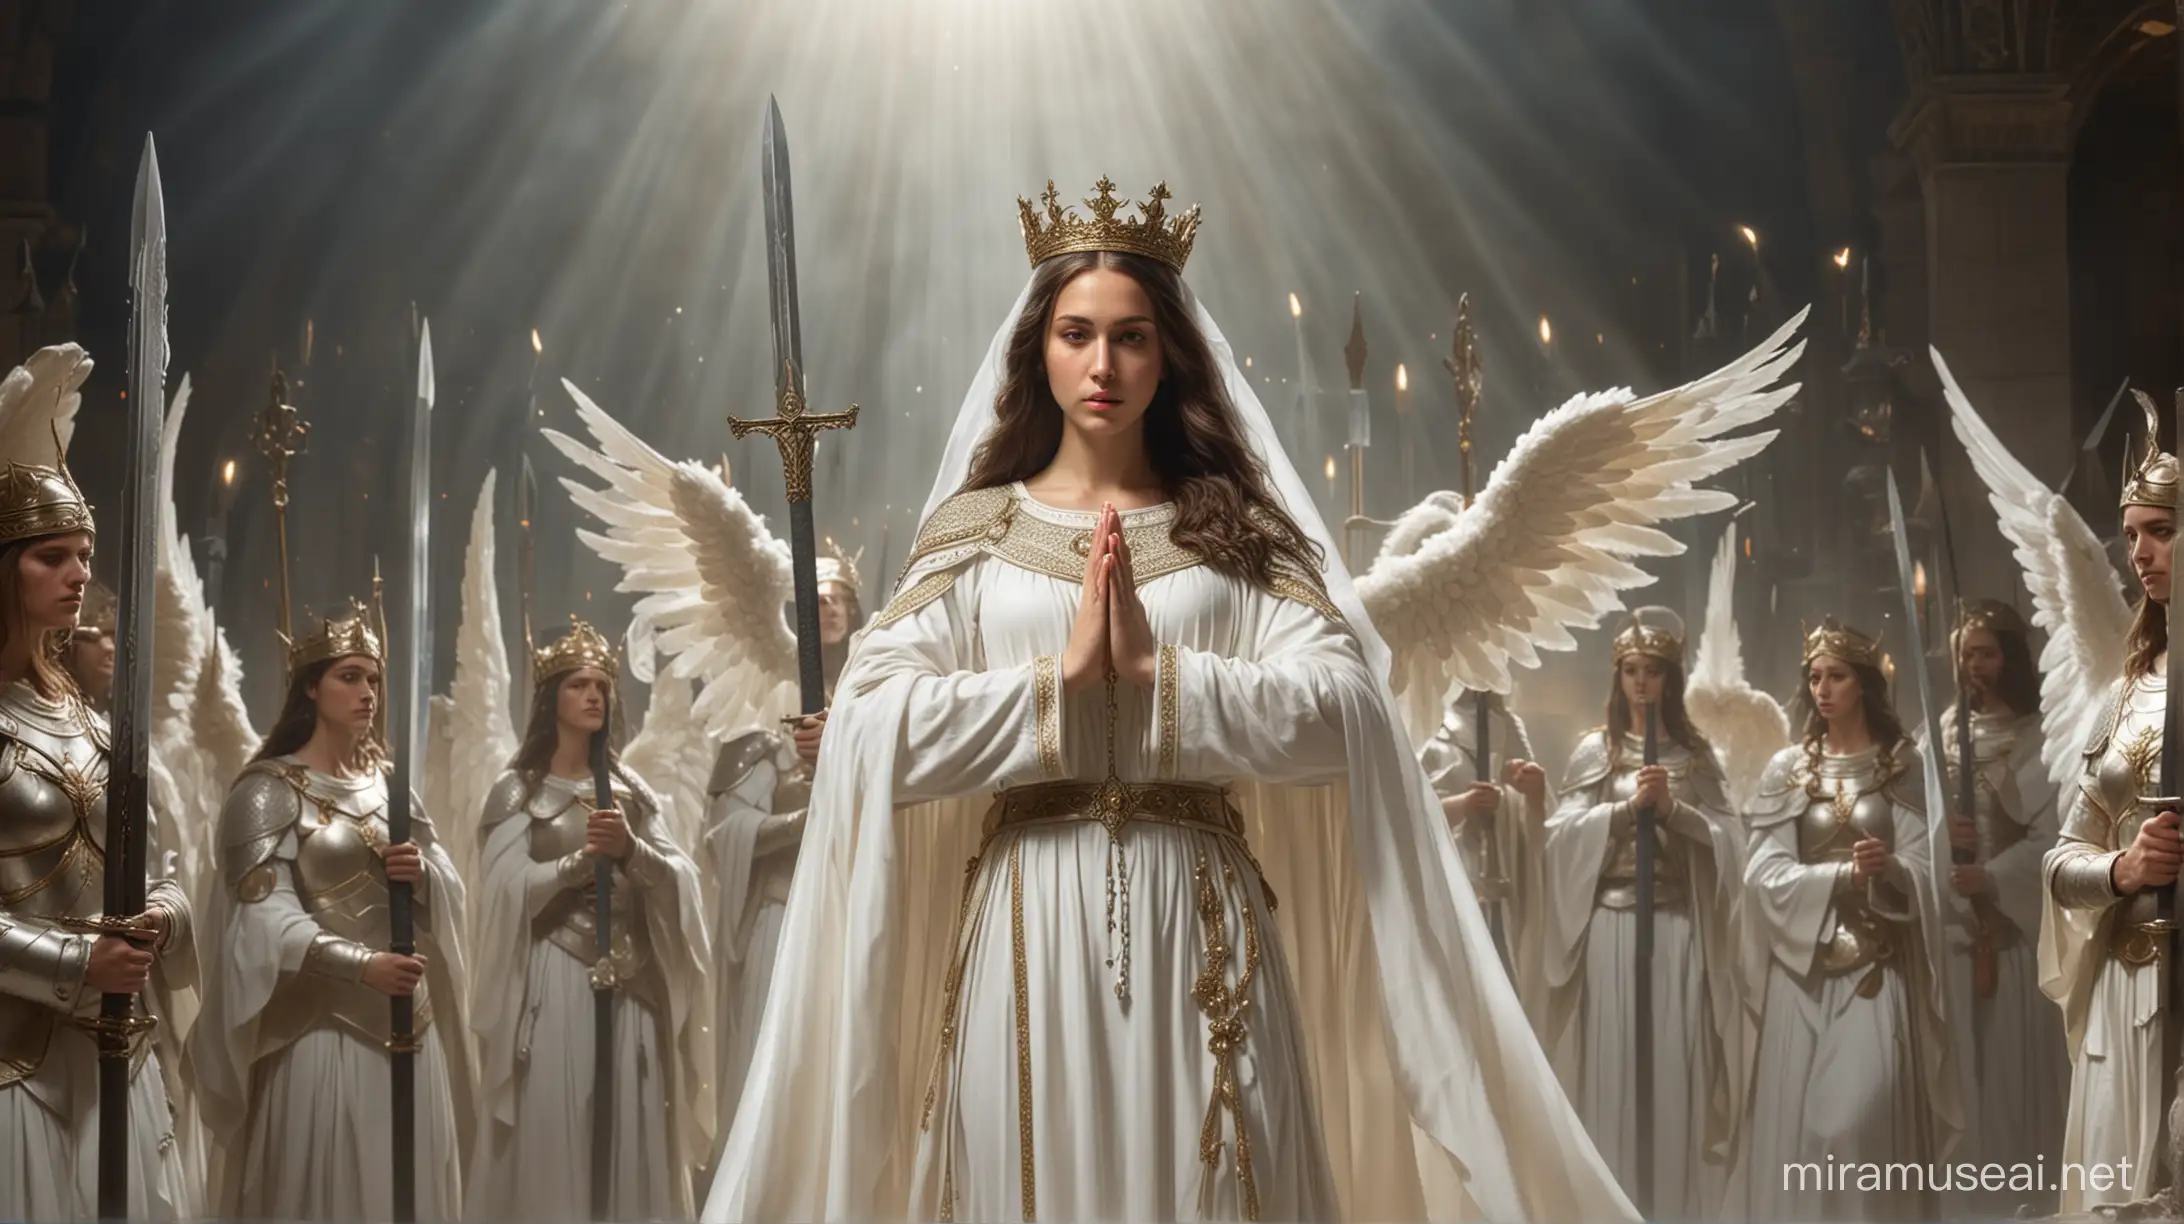 Young woman Virgin Mary with veil and crown on head, in white dress, over dressed in full armor with a sword in a hand staying in front of large army of angel warriors with wings, lighting background